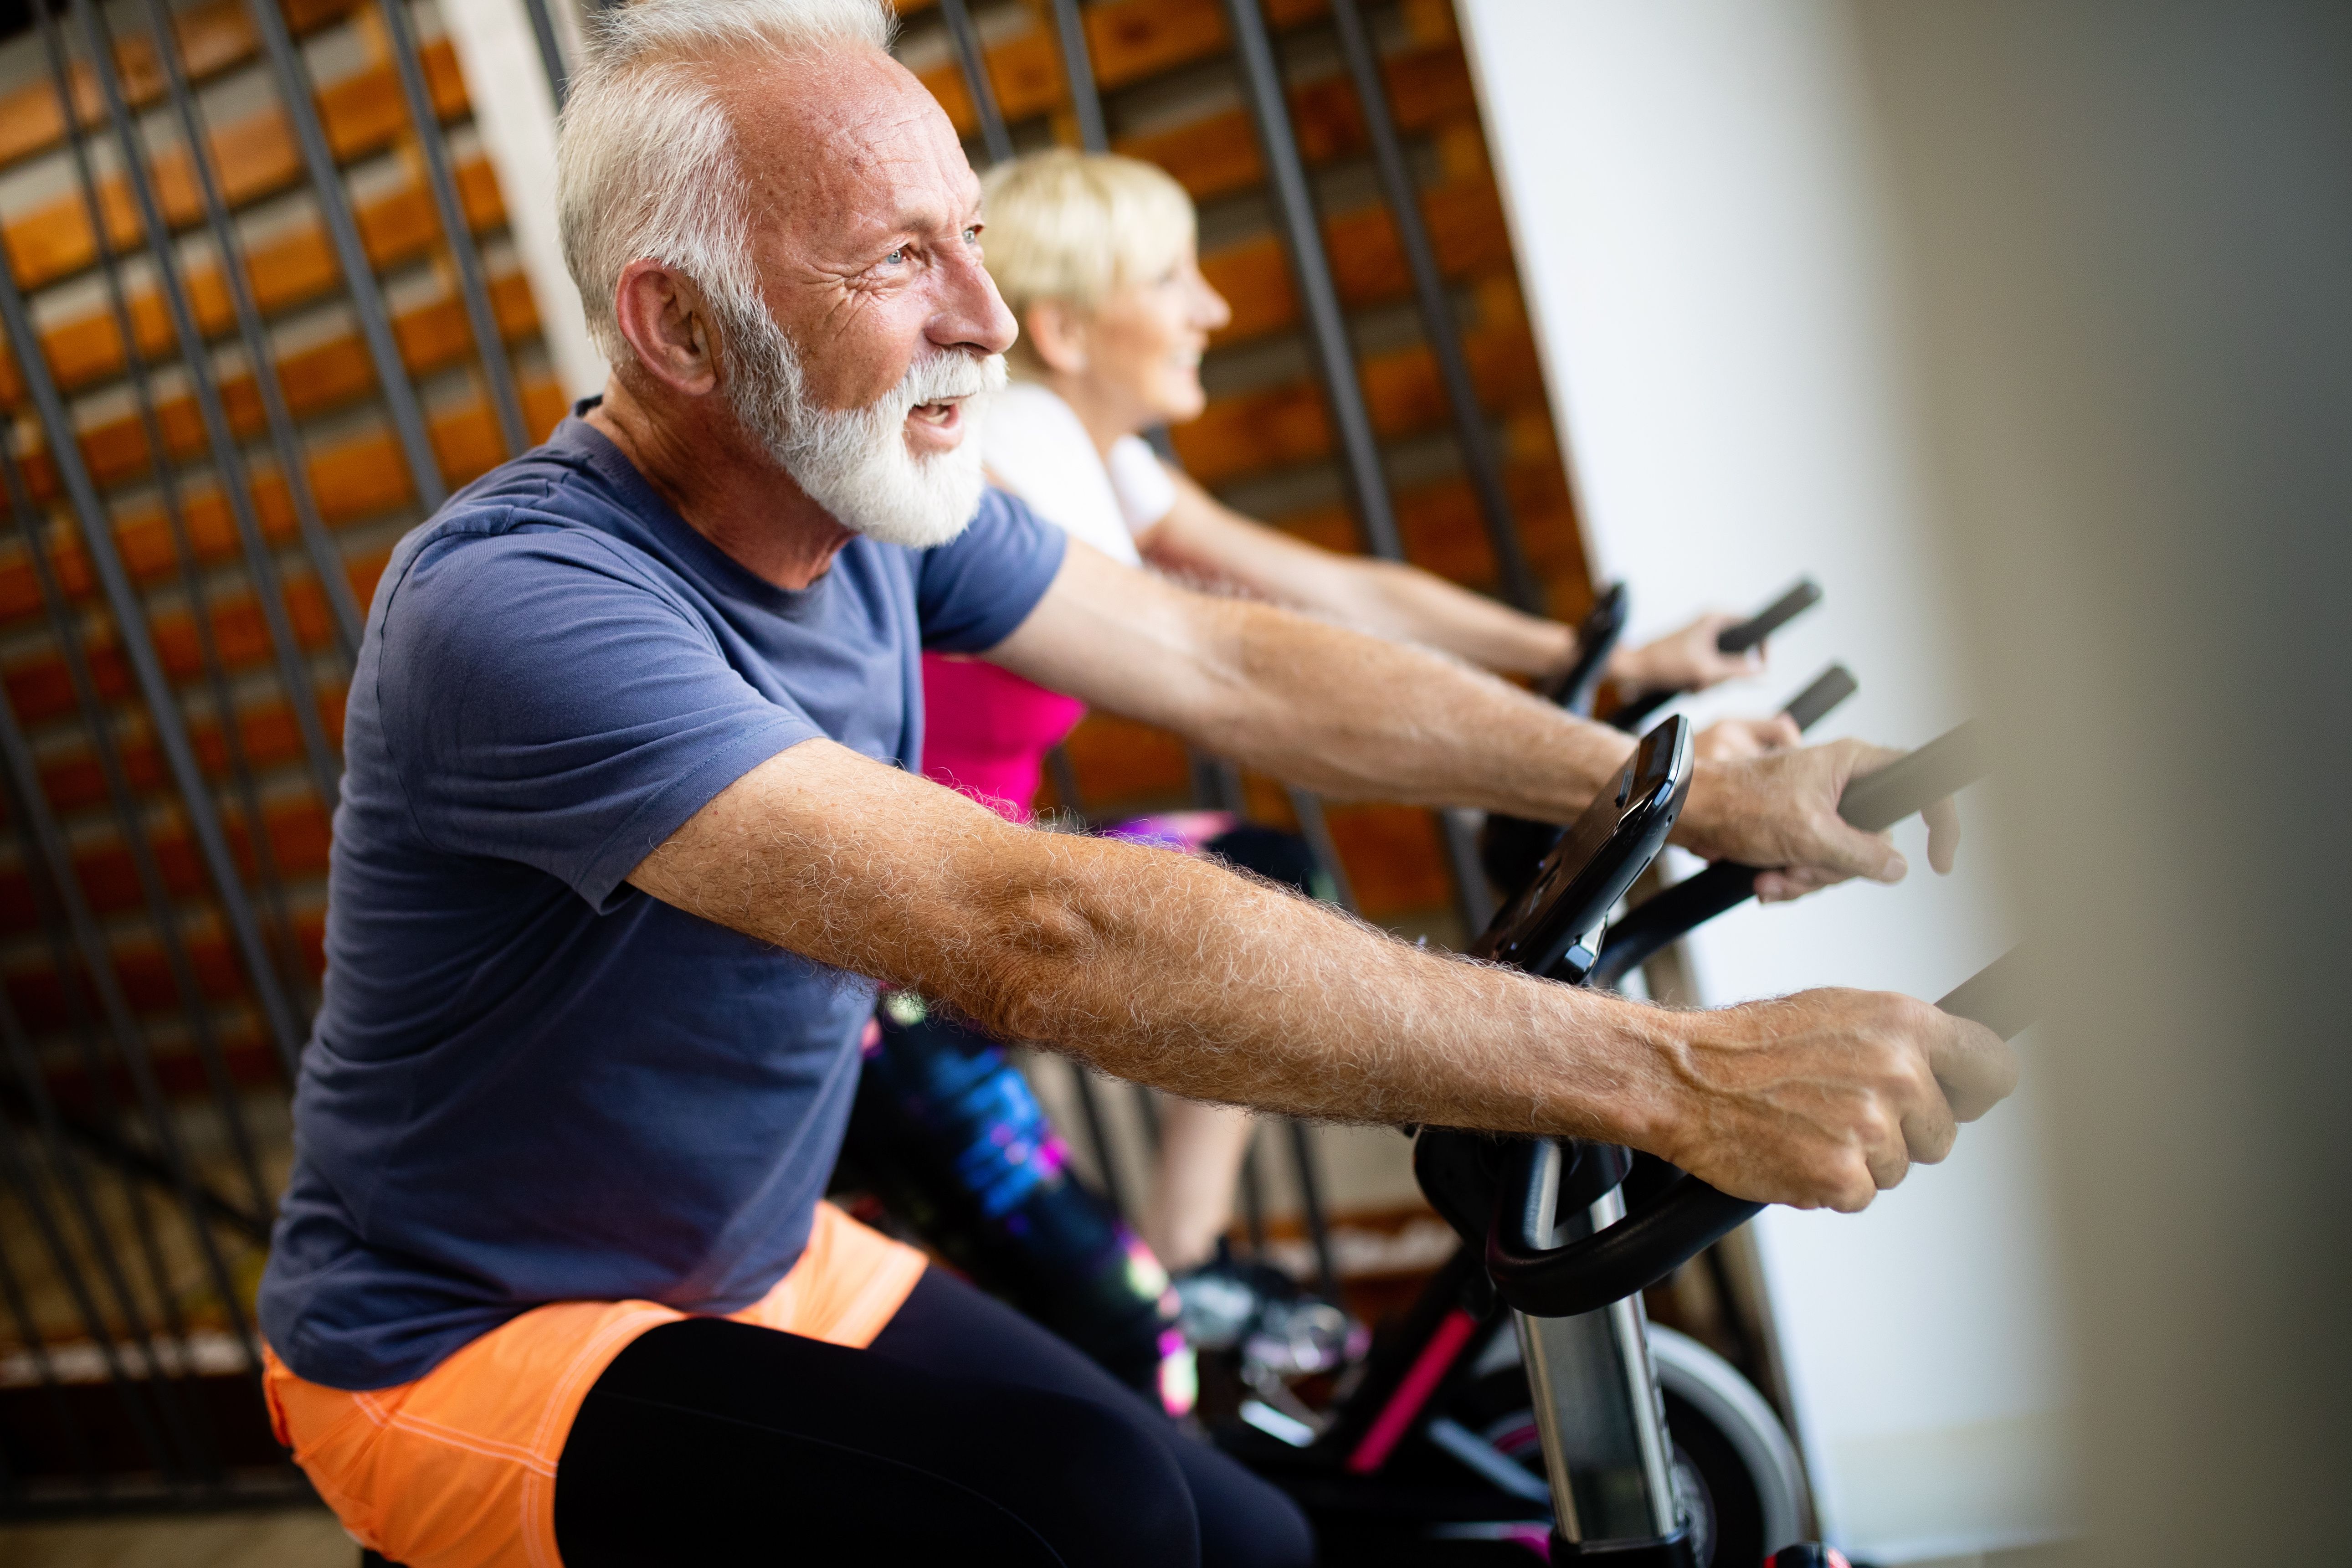 Moderate Physical Activity Could Lower Fracture Risk in Middle-Aged Adults - Endocrinology Network